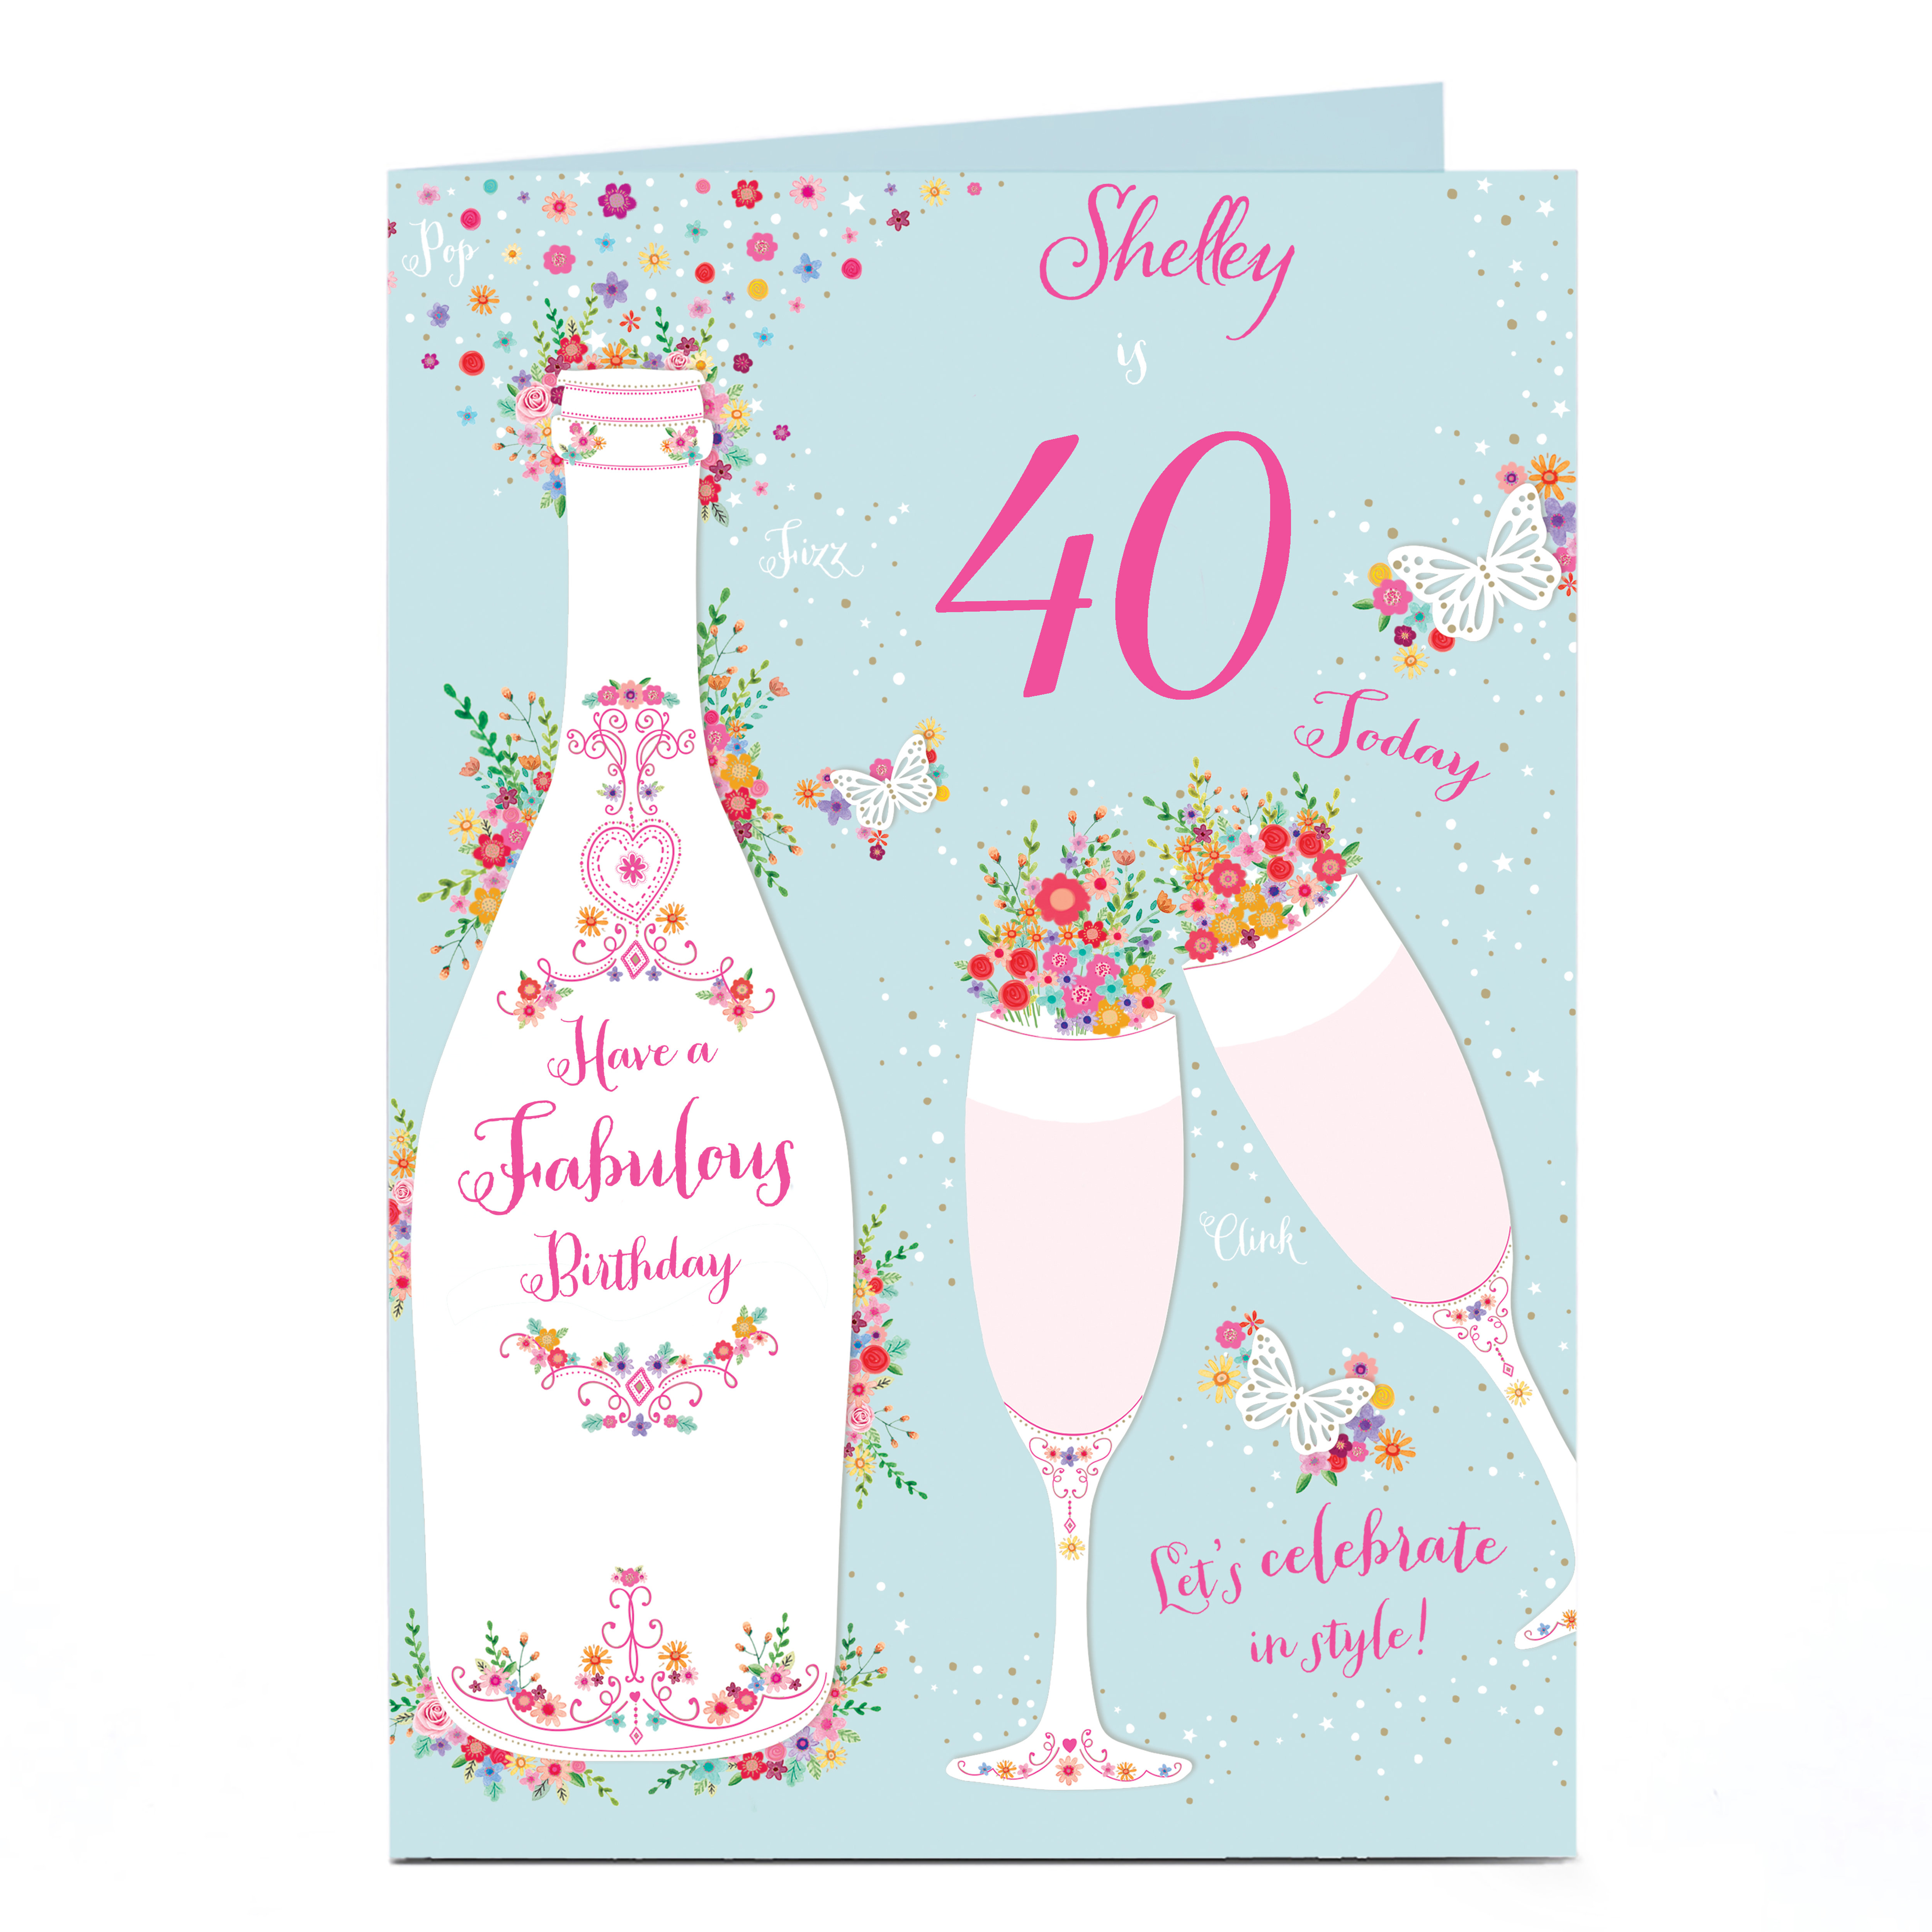 Personalised Any Age Birthday Card - Champagne, Flutes & Flowers